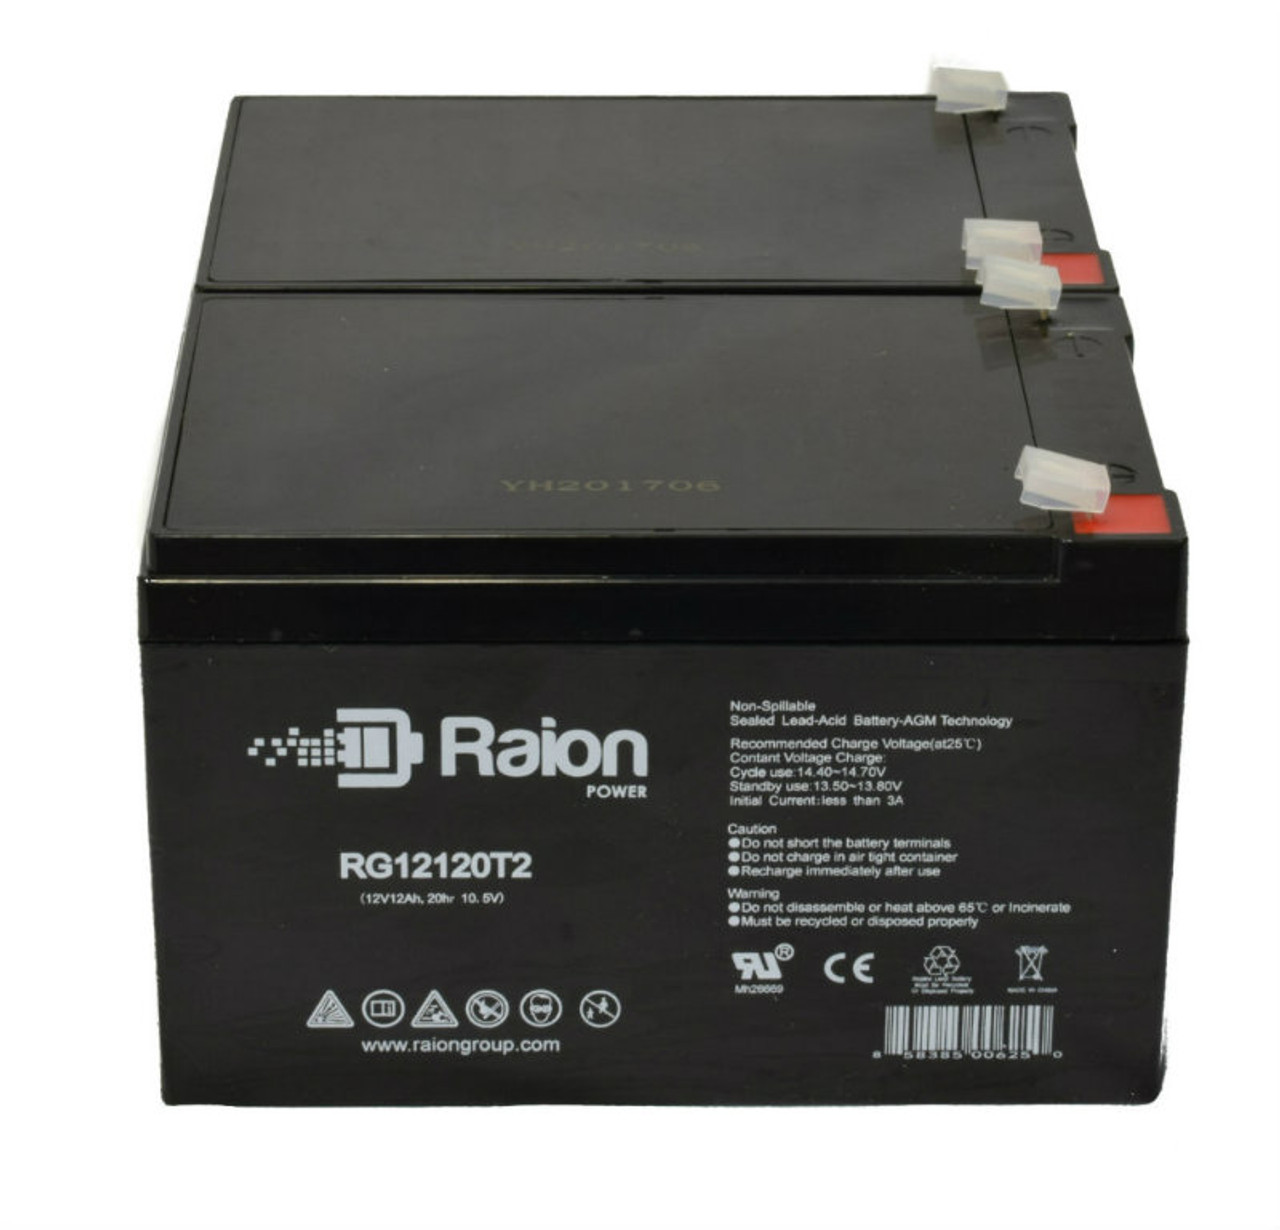 Raion Power 12V 12Ah Non-Spillable Compatible Replacement Battery for Champion NP14-12 - (2 Pack)